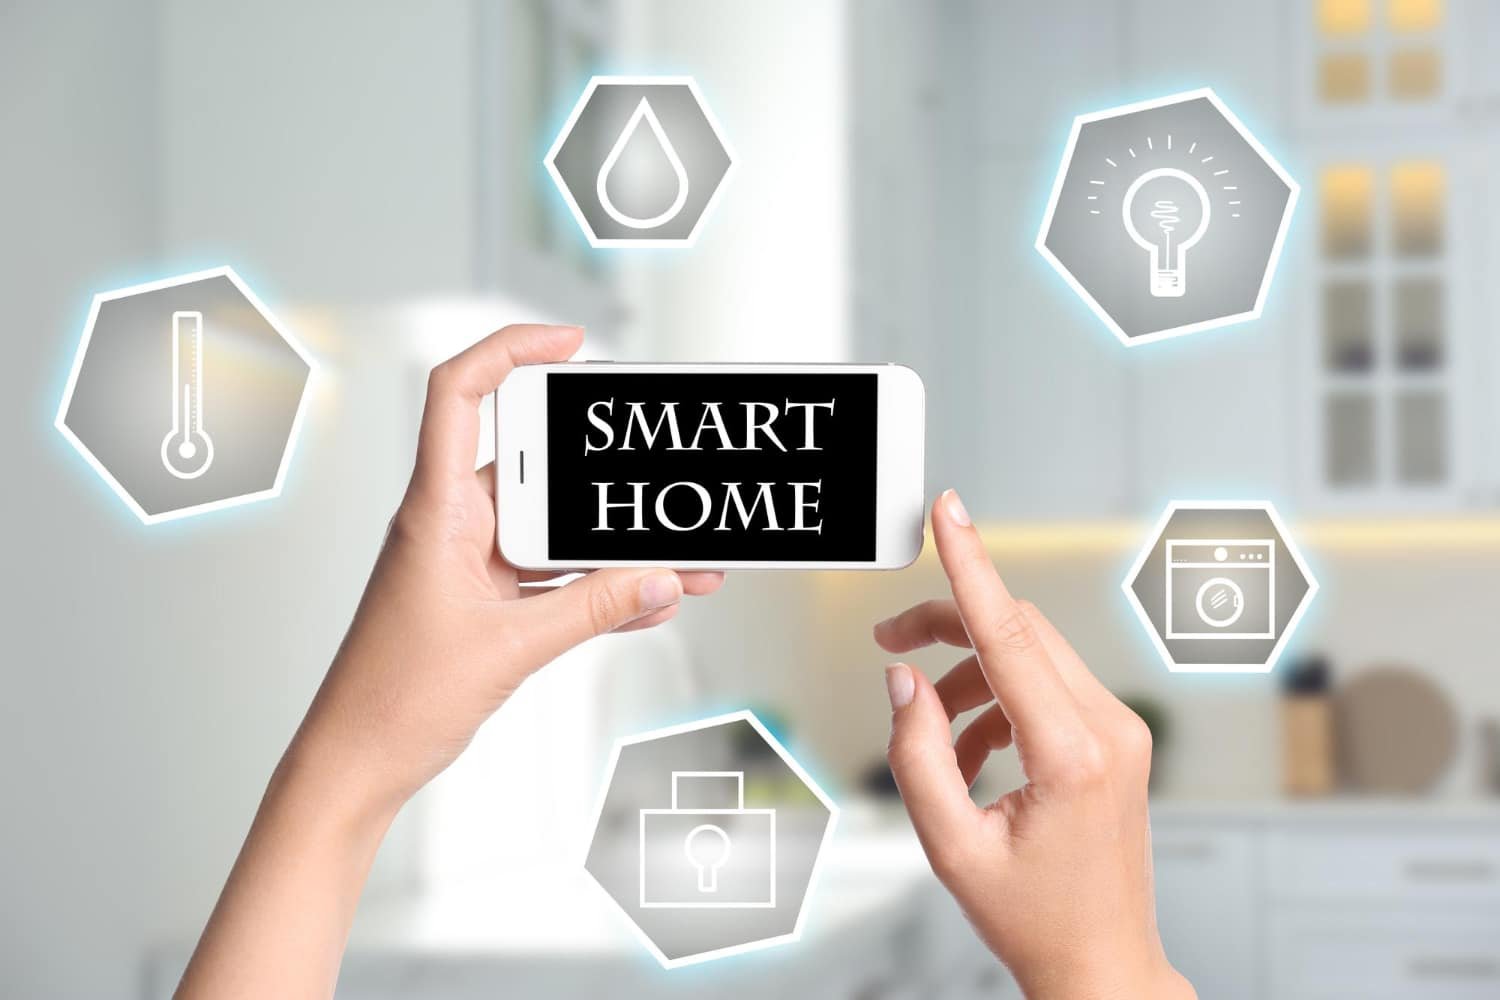 Experience The Latest In Smart Home Technology With Clove